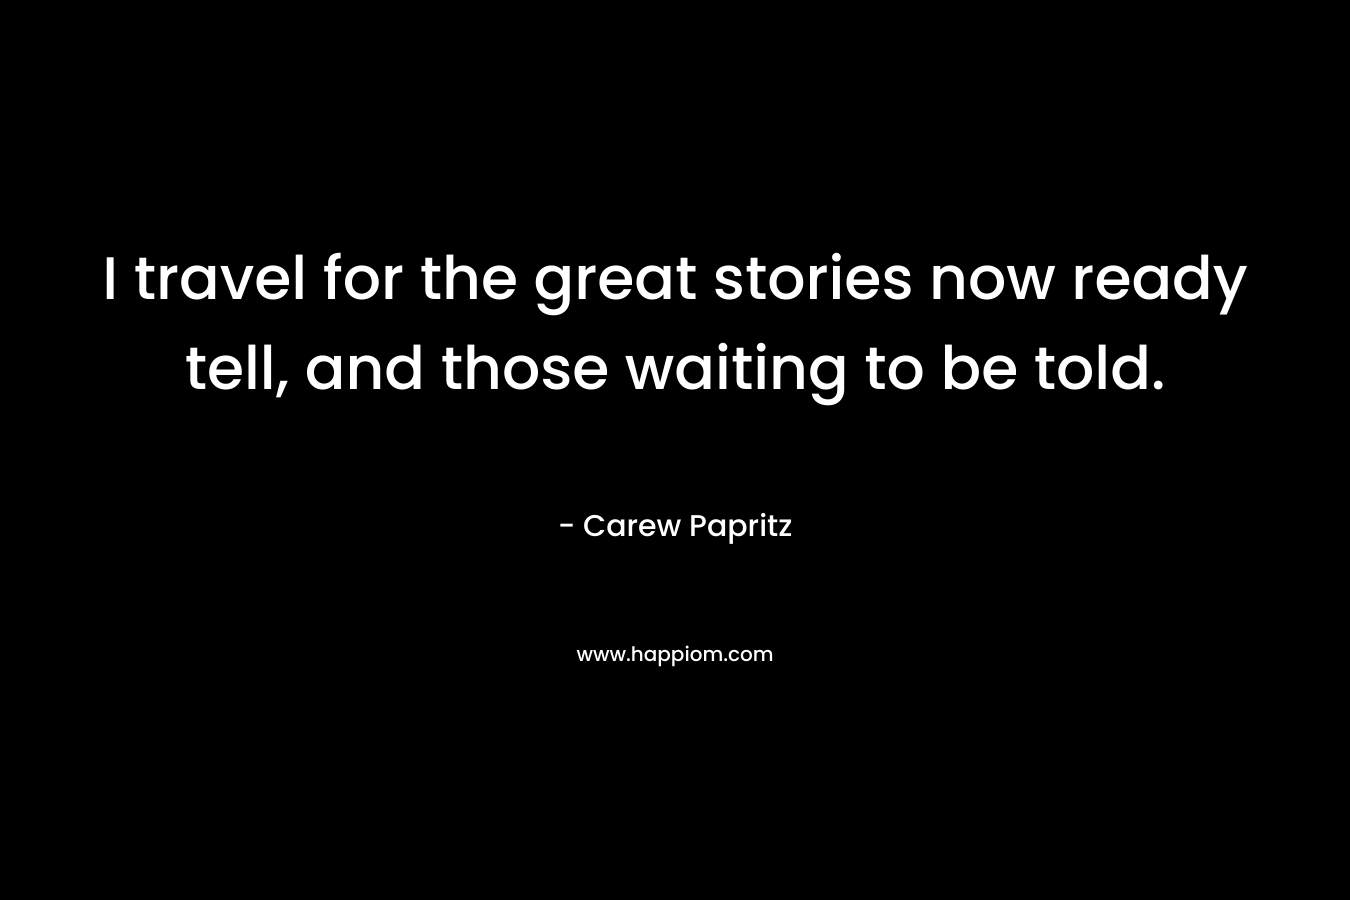 I travel for the great stories now ready tell, and those waiting to be told.